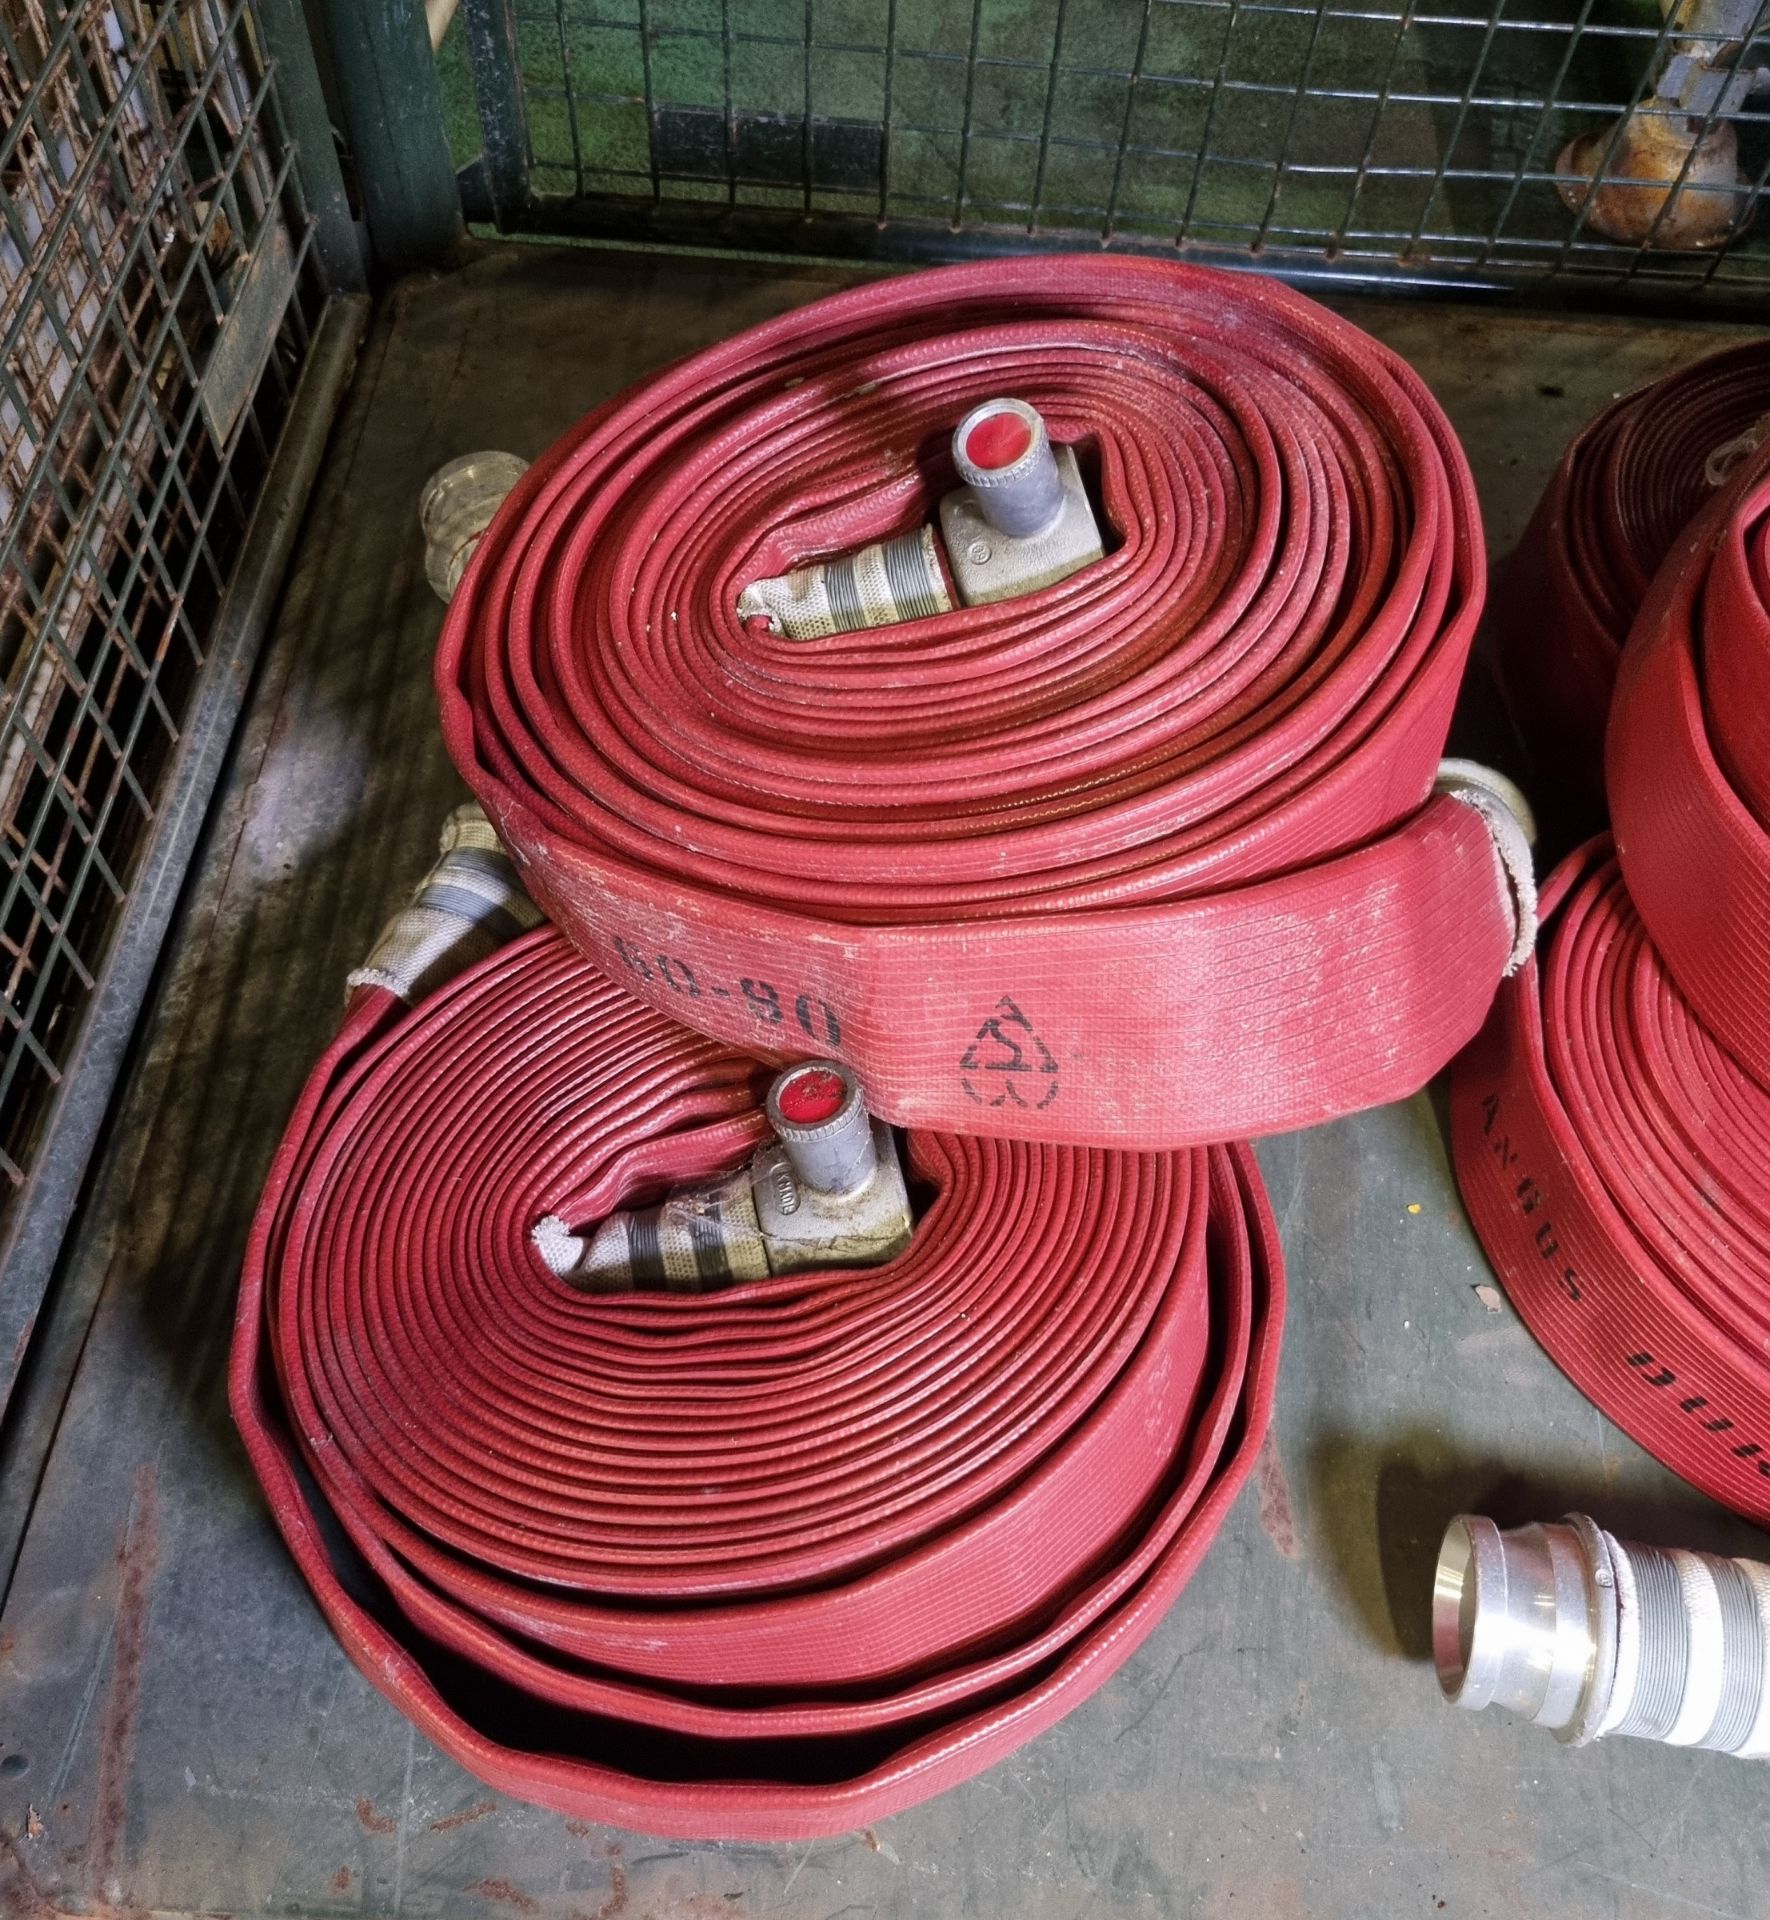 6x Angus Duraline 64mm lay flat hoses with couplings - approx 15m in length - Bild 4 aus 4